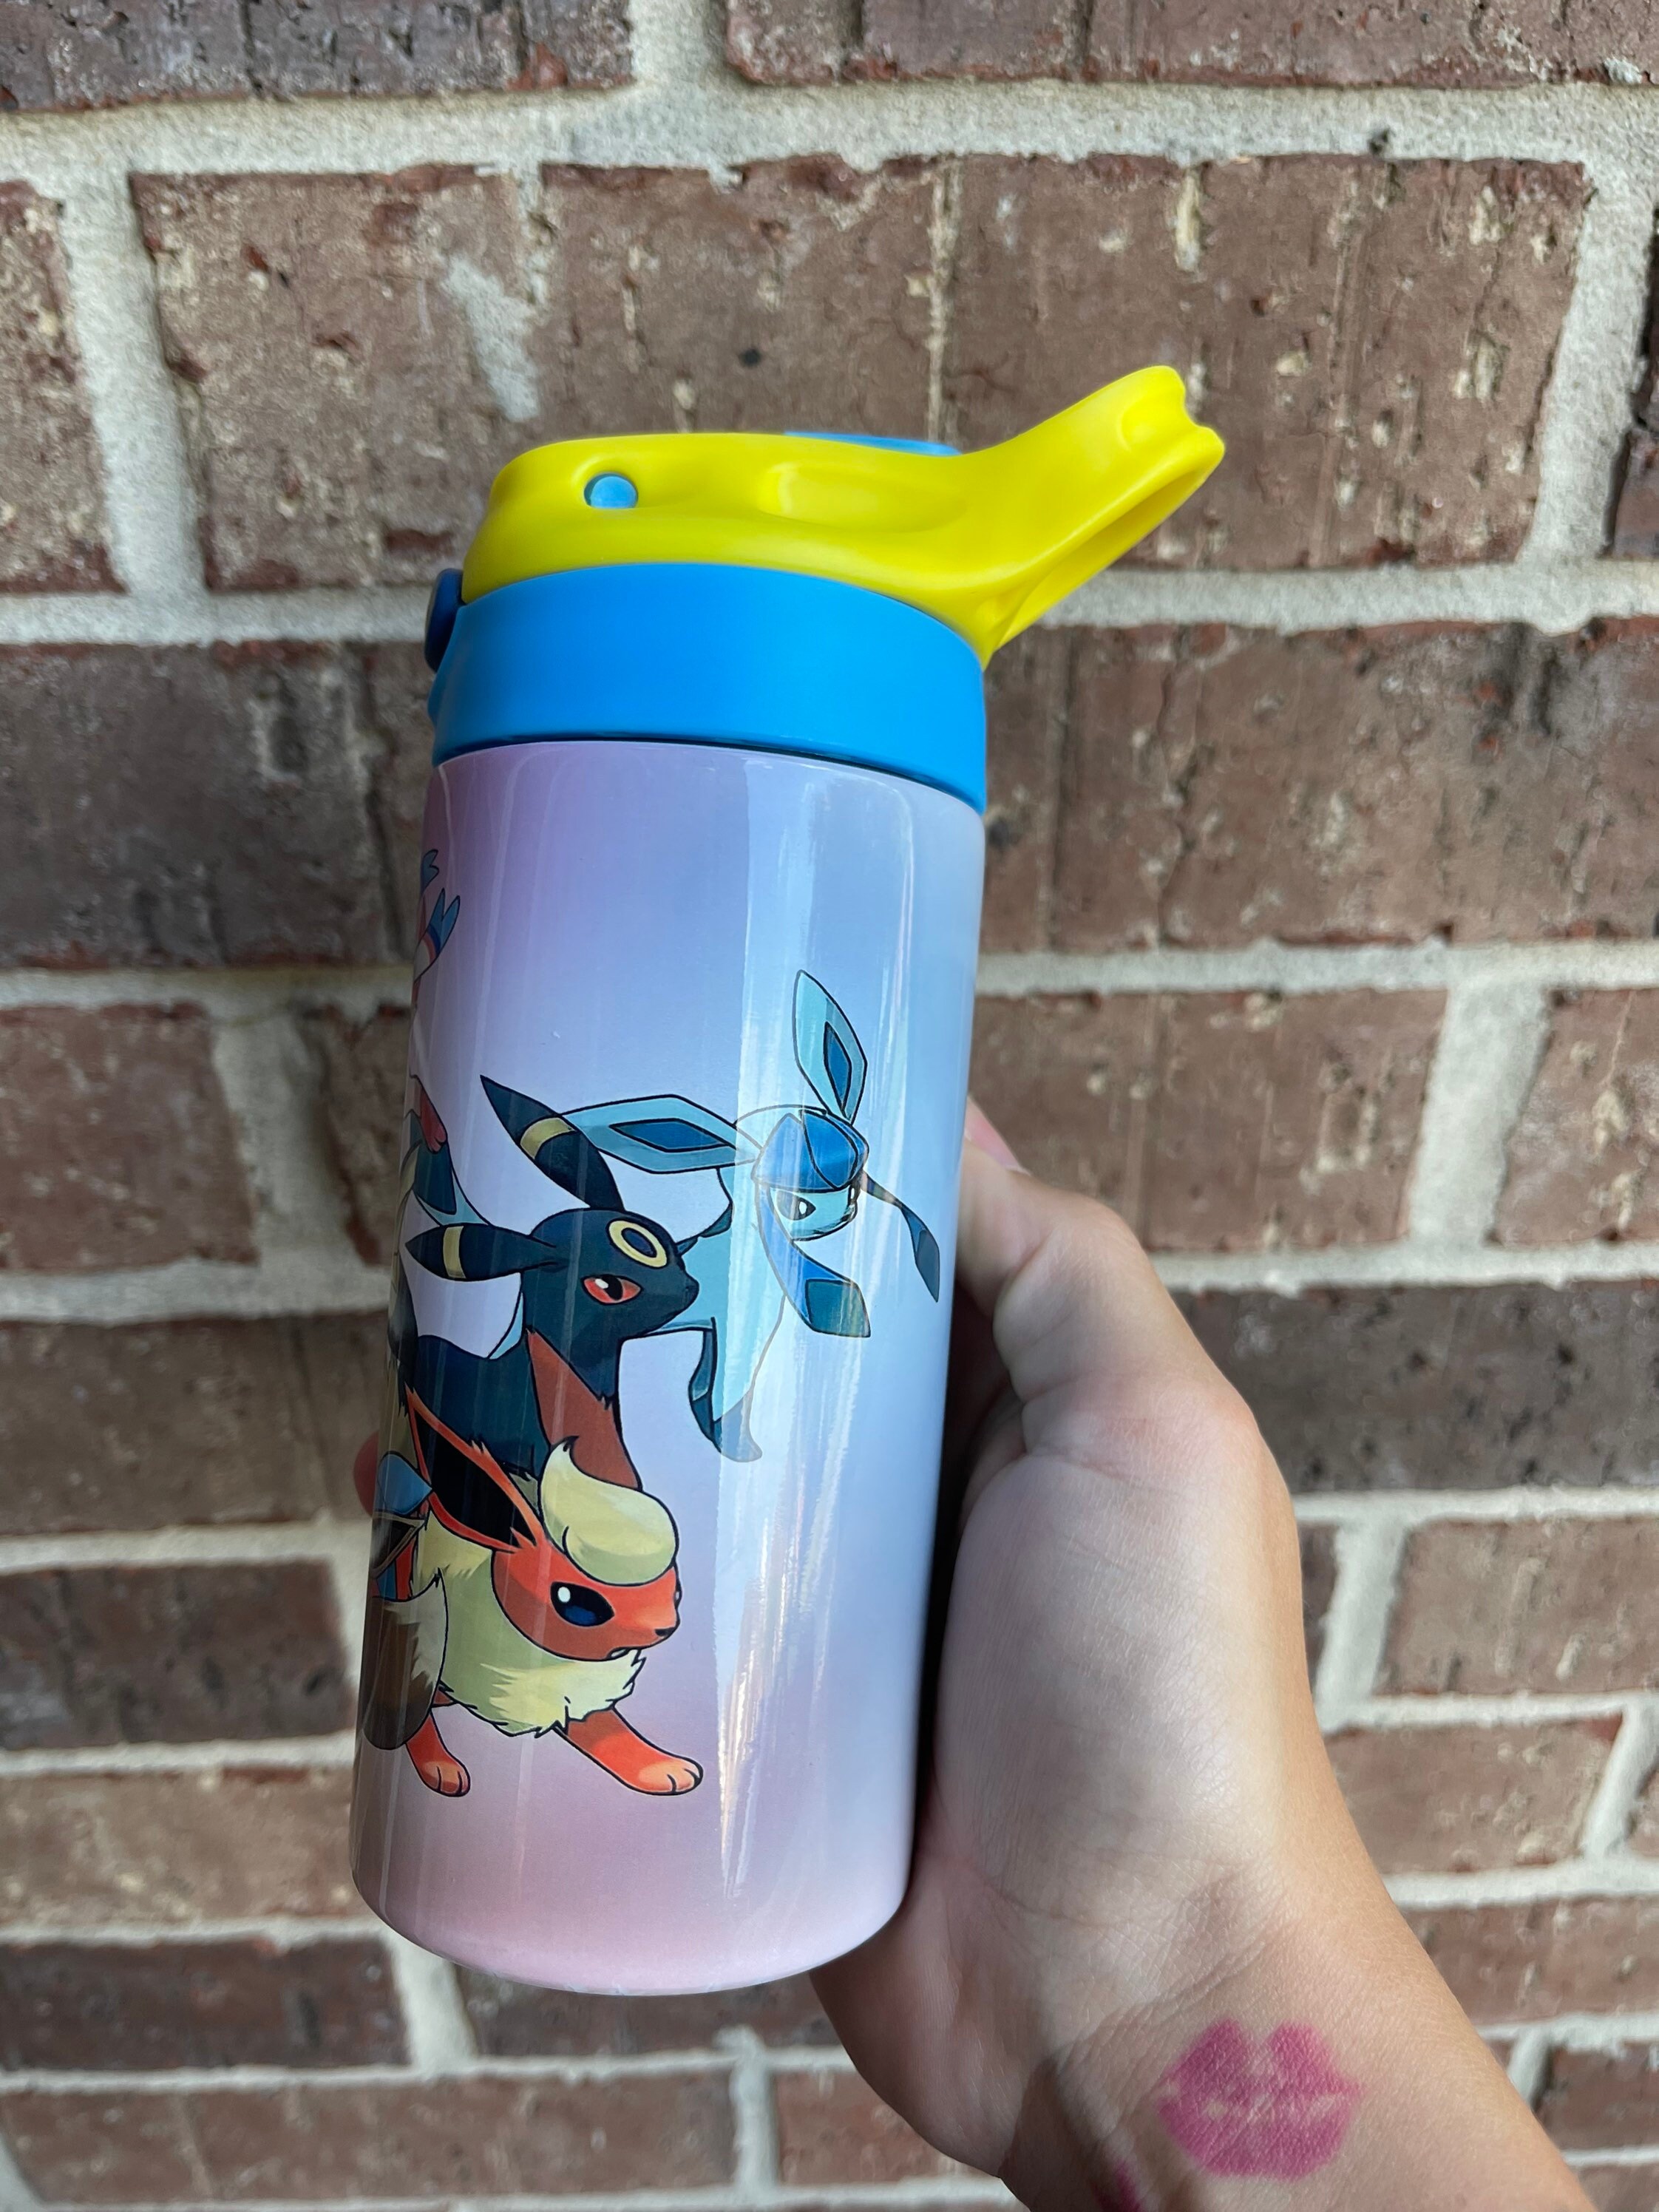 Pokemon Eevee Officially Licensed Plastic Tumbler Cup with Lid and